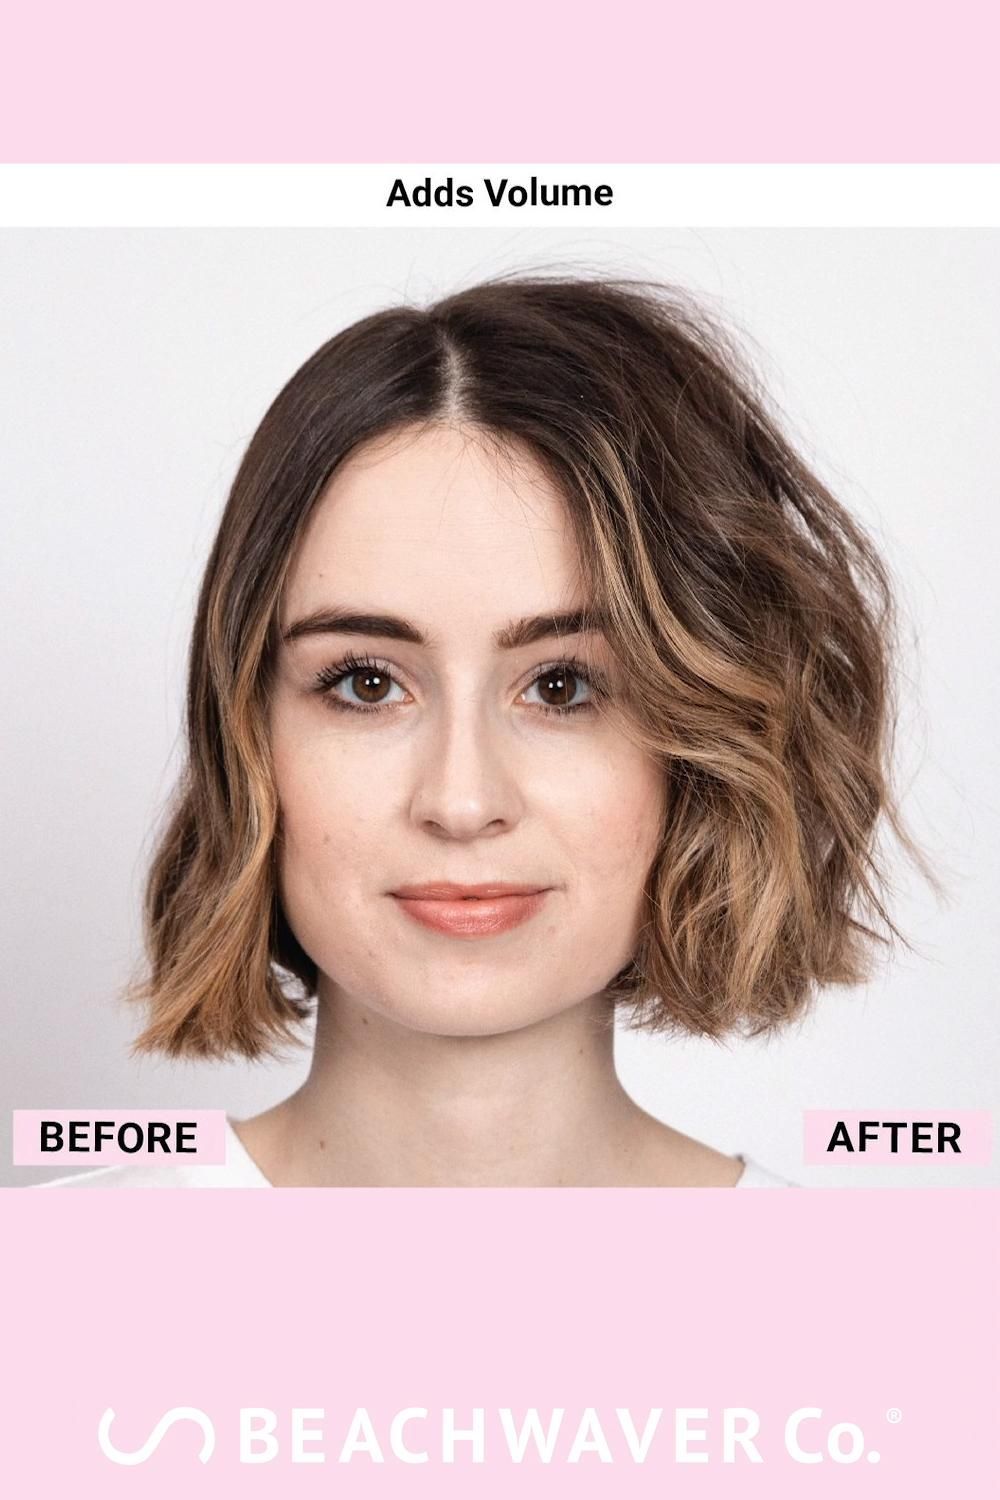 Second Chance Dry Shampoo -   17 hairstyles For Round Faces bun ideas